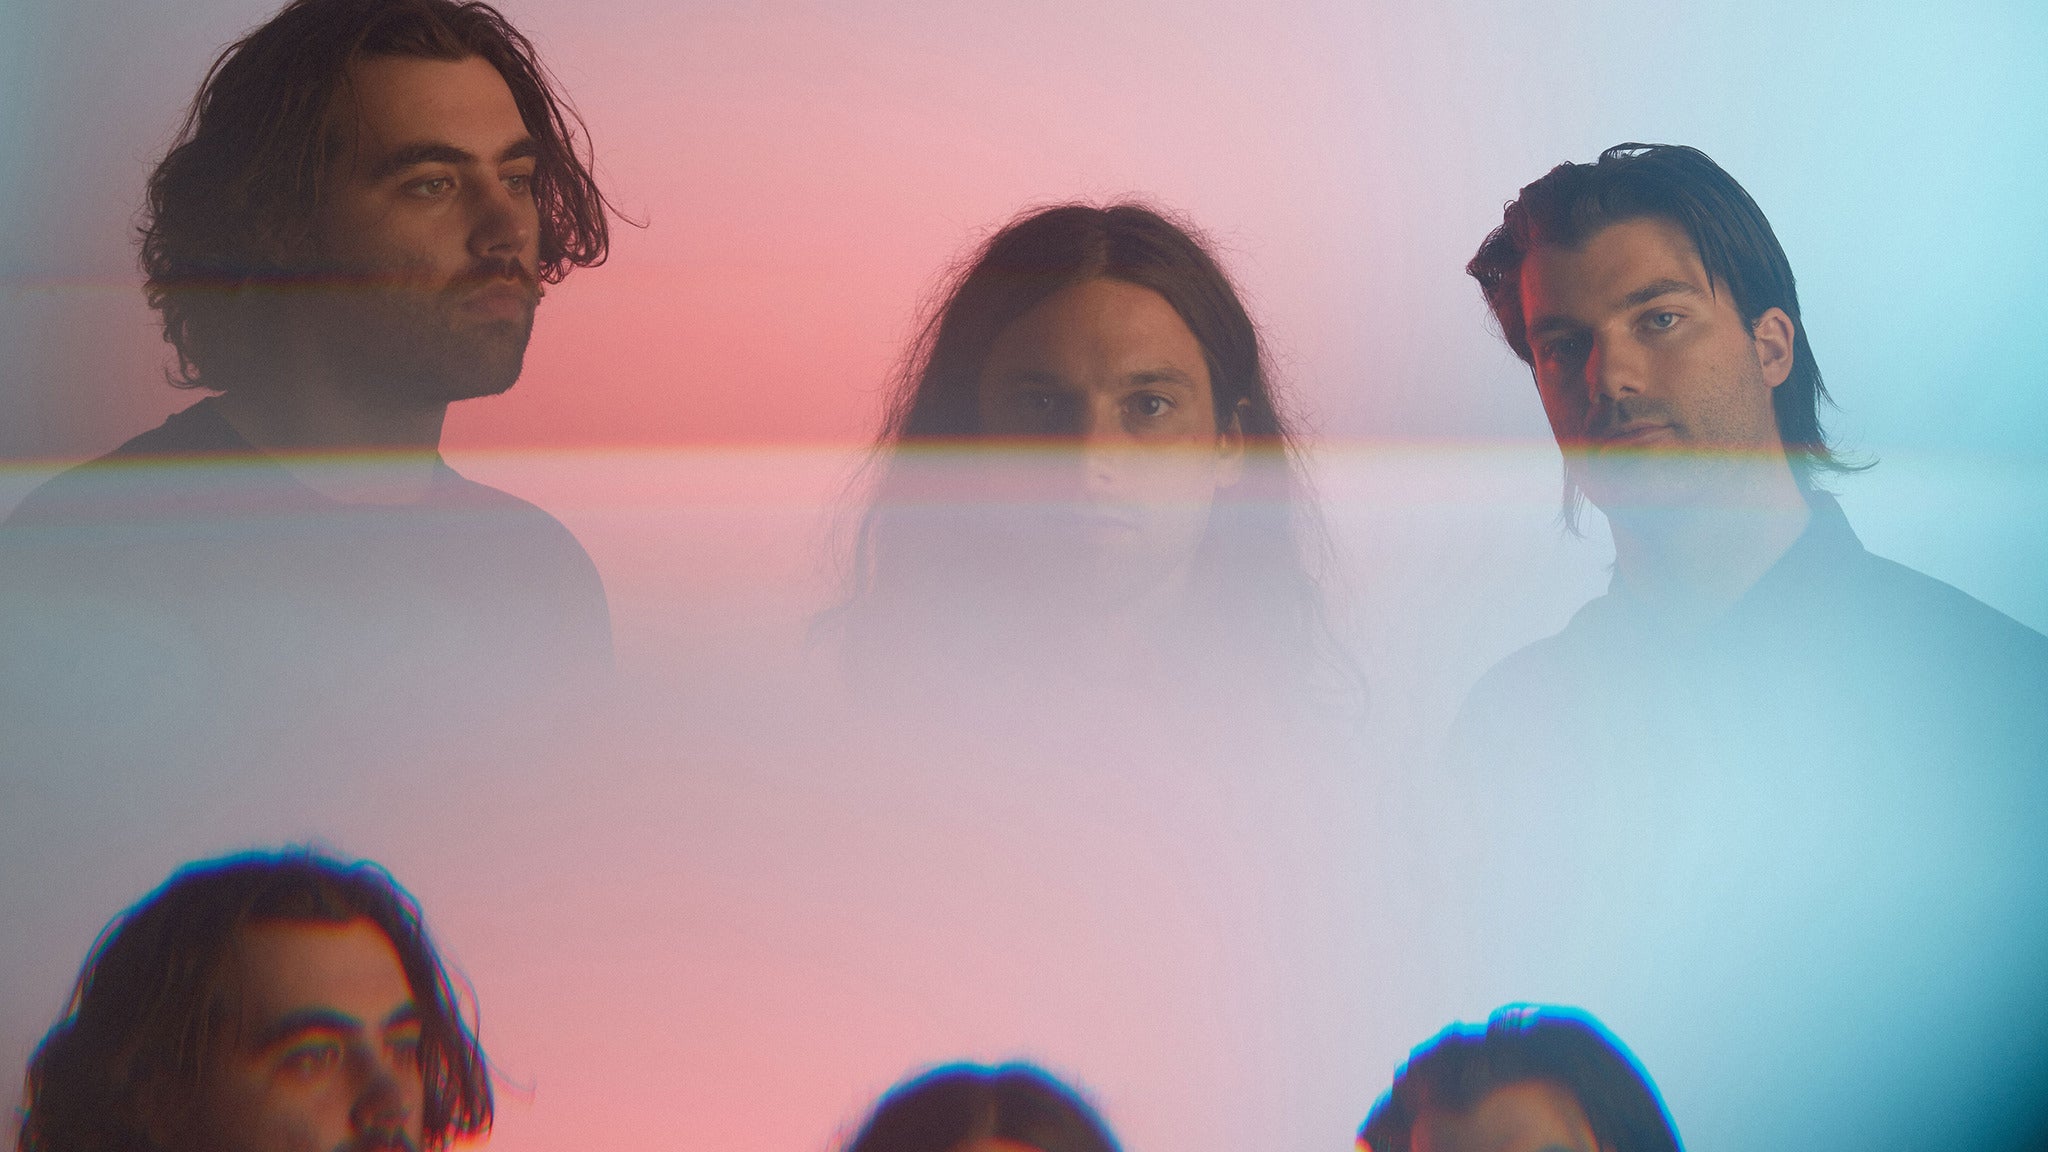 Turnover in Brooklyn promo photo for Exclusive presale offer code